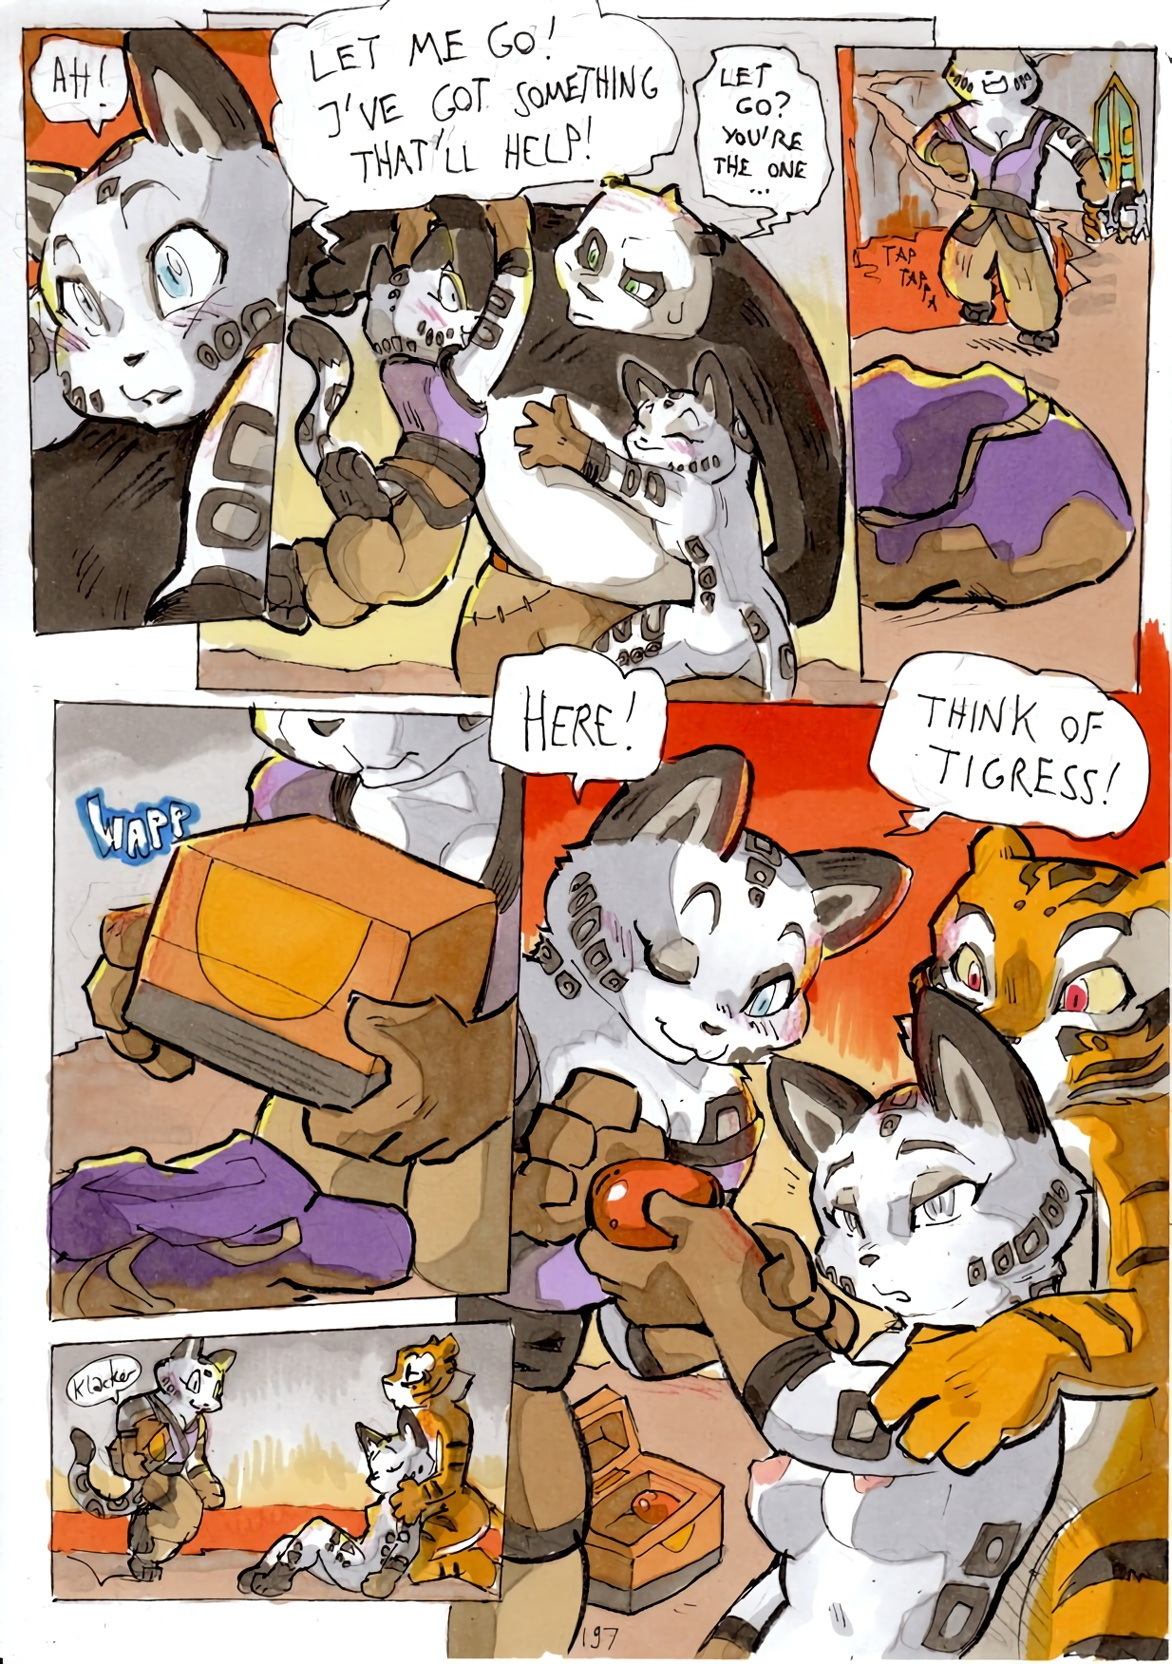 Better Late than Never 2 - Page 52